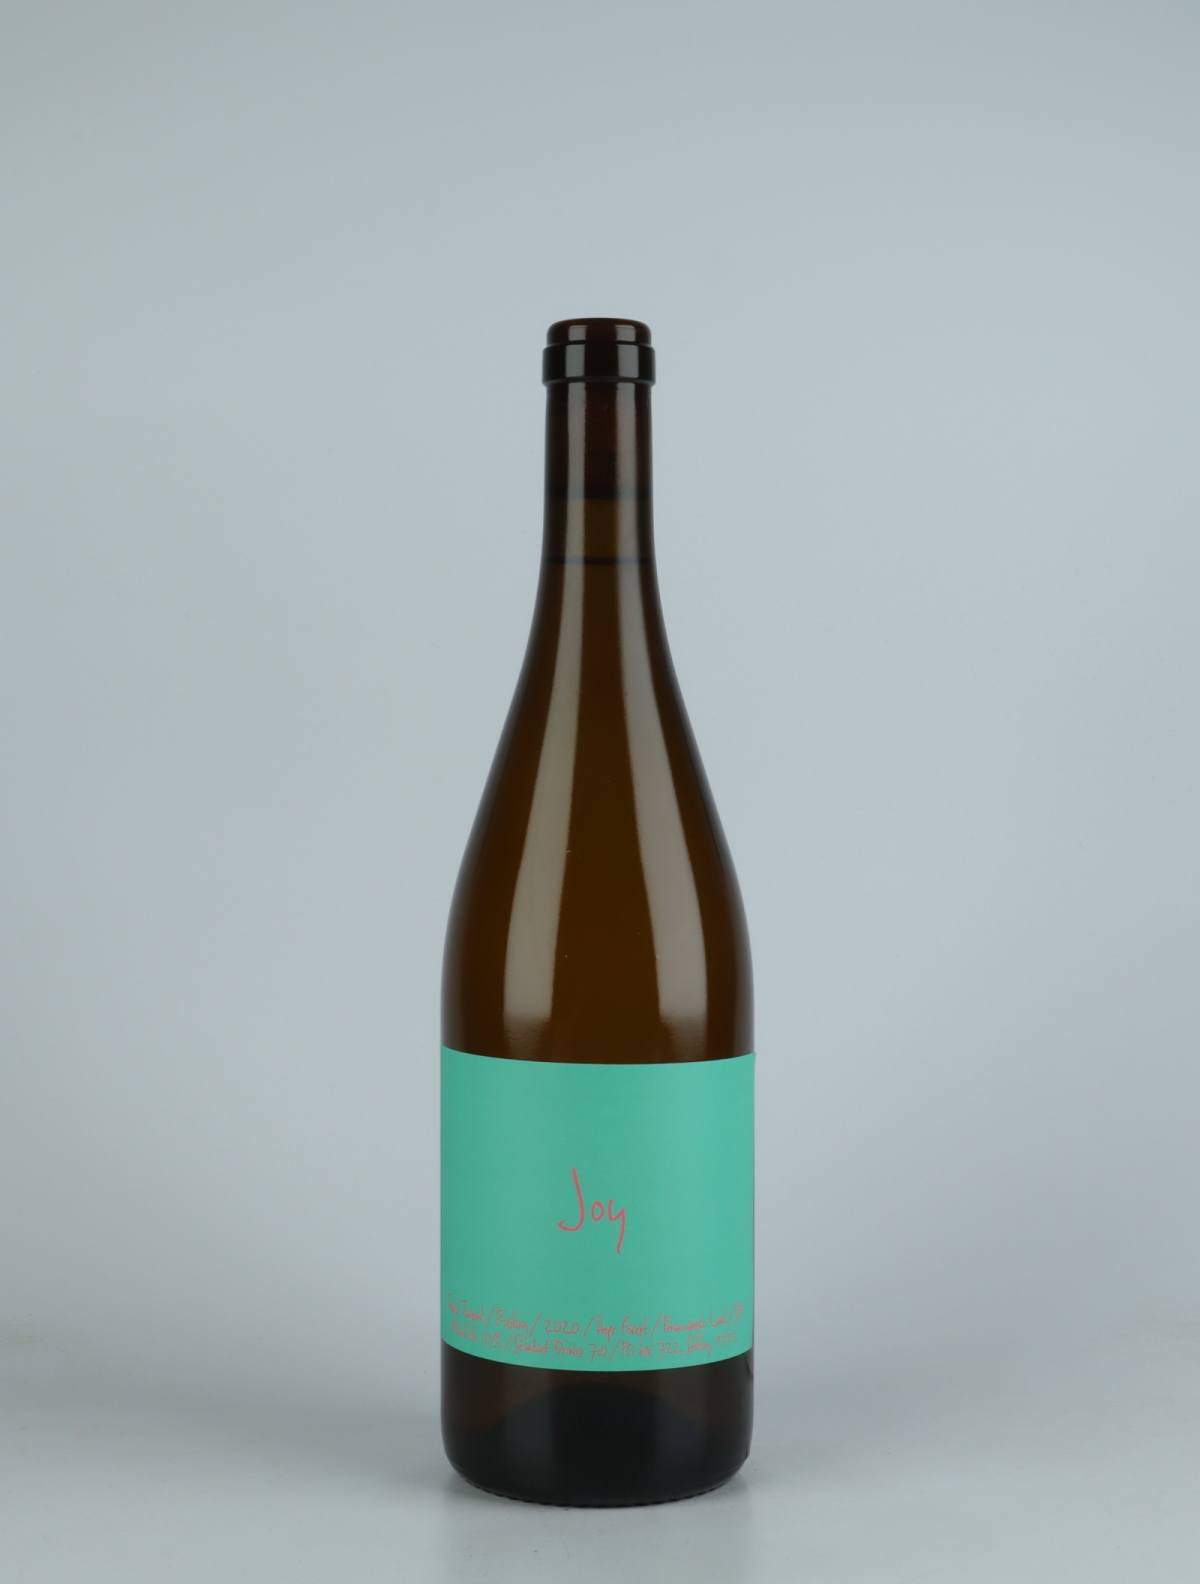 A bottle 2020 Joy Riesling White wine from Travis Tausend, Adelaide Hills in Australia